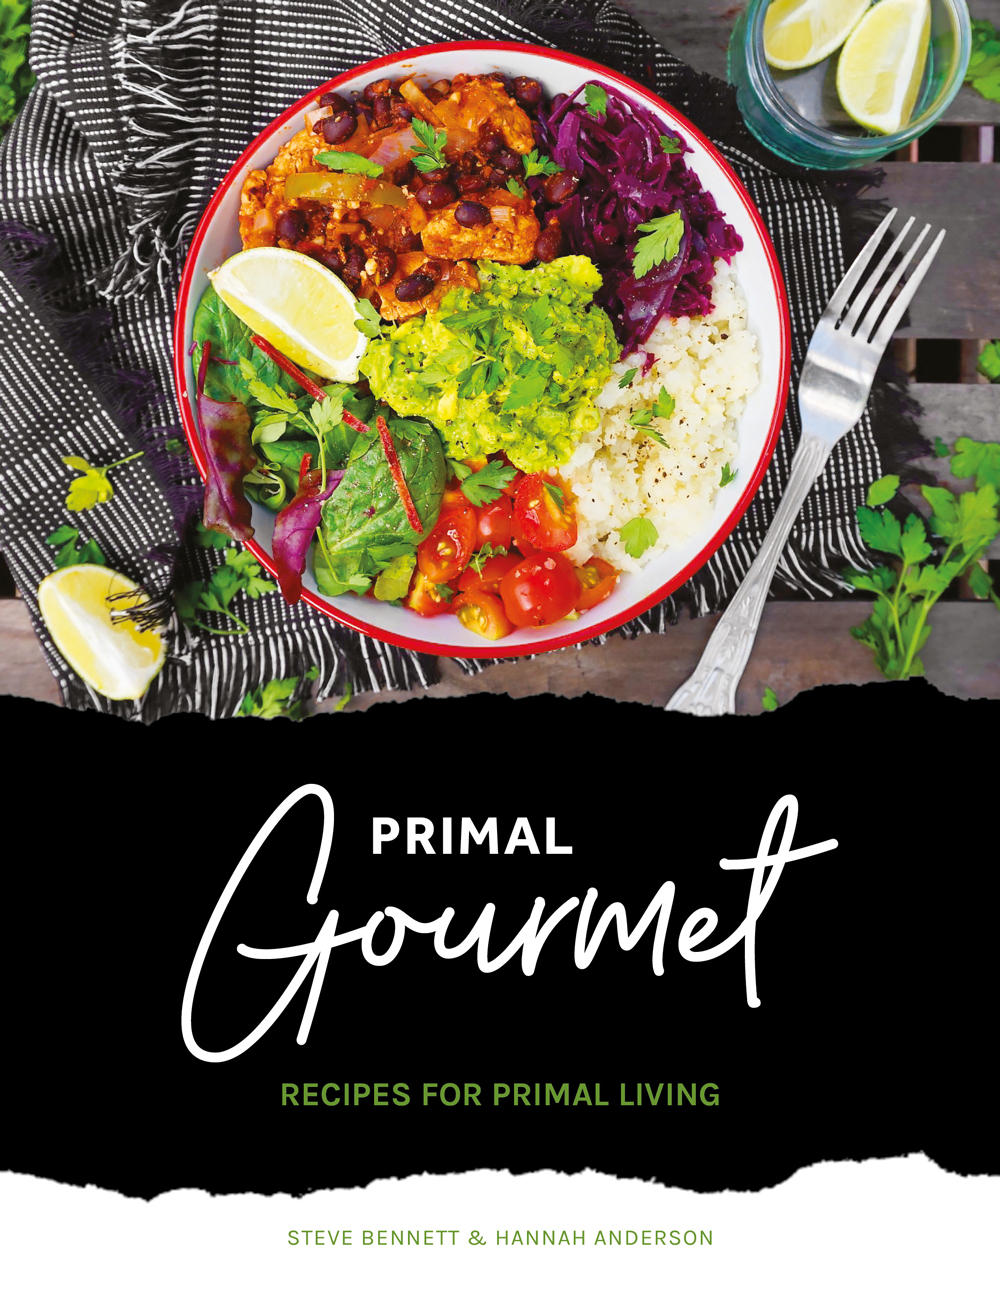 Simple And Effective Recipe Book Primal Gourmet Takes Inspiration From Our Ancestors In A Mission To Help Britain Eat Its Way Healthy